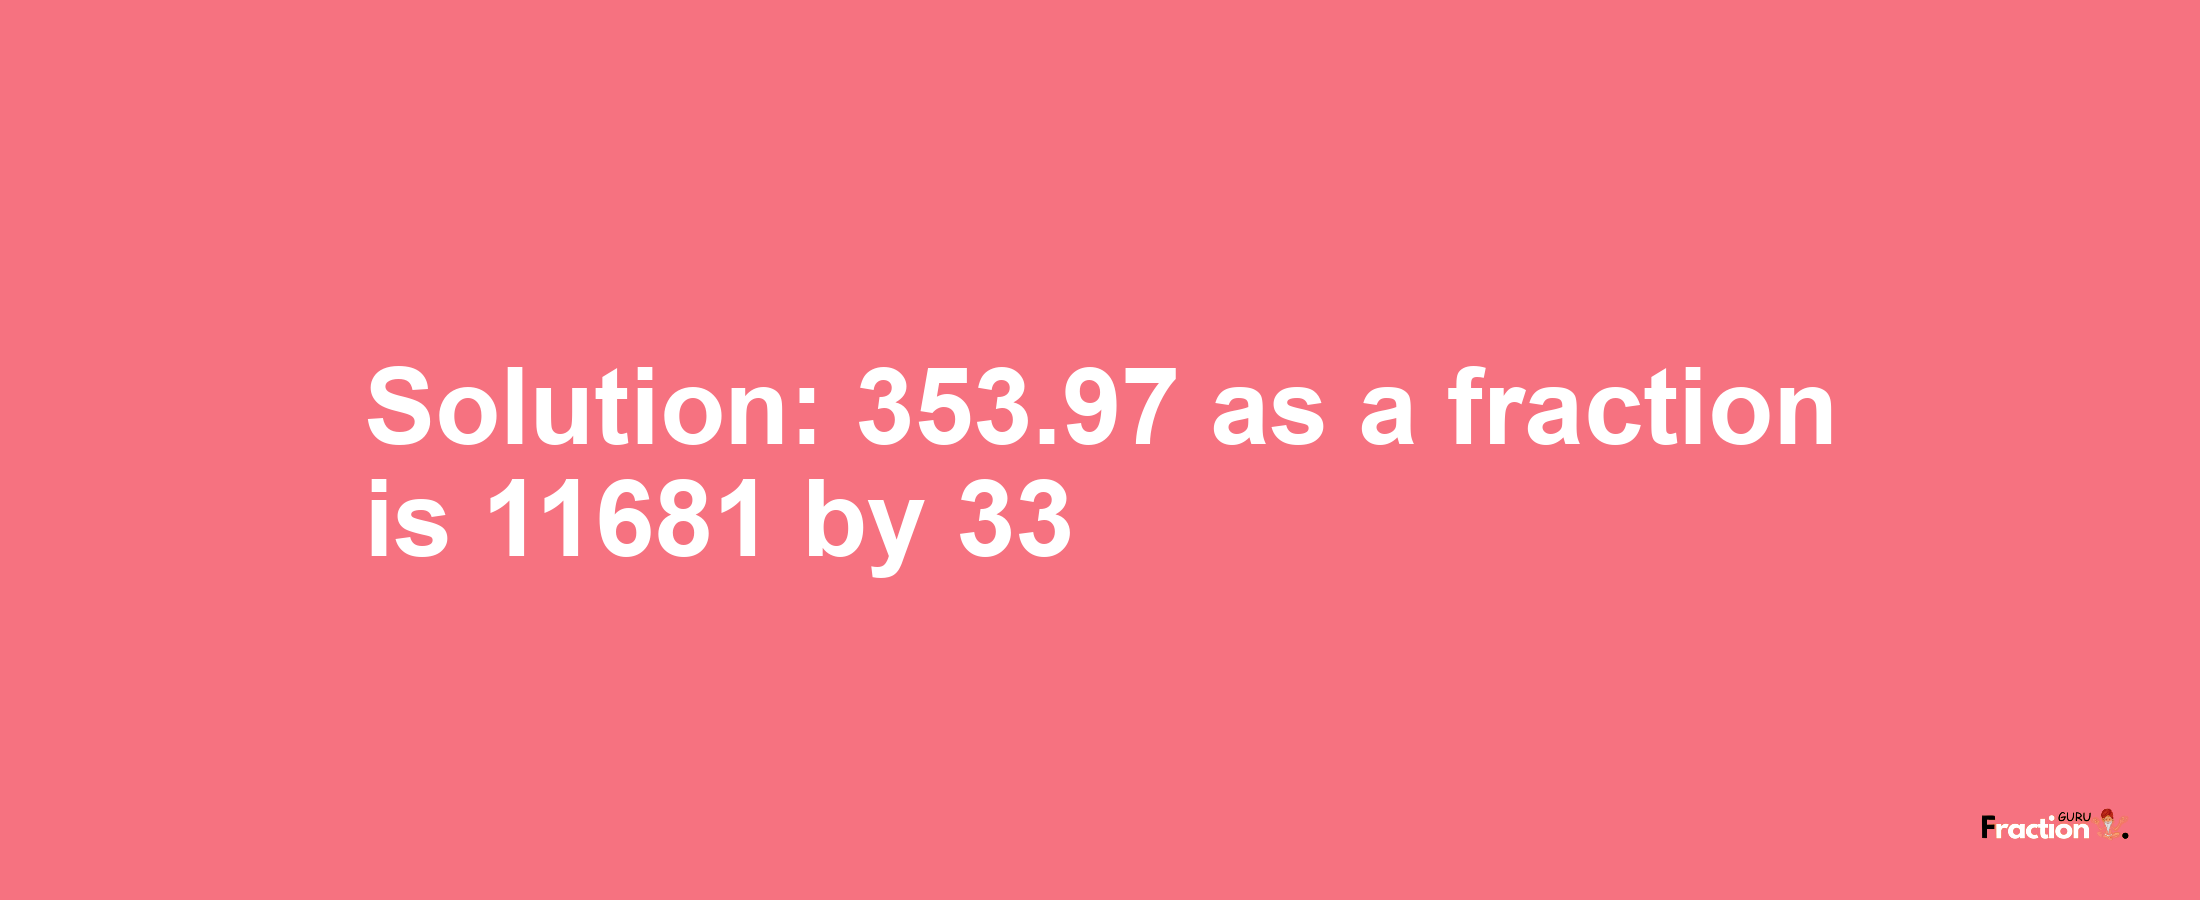 Solution:353.97 as a fraction is 11681/33